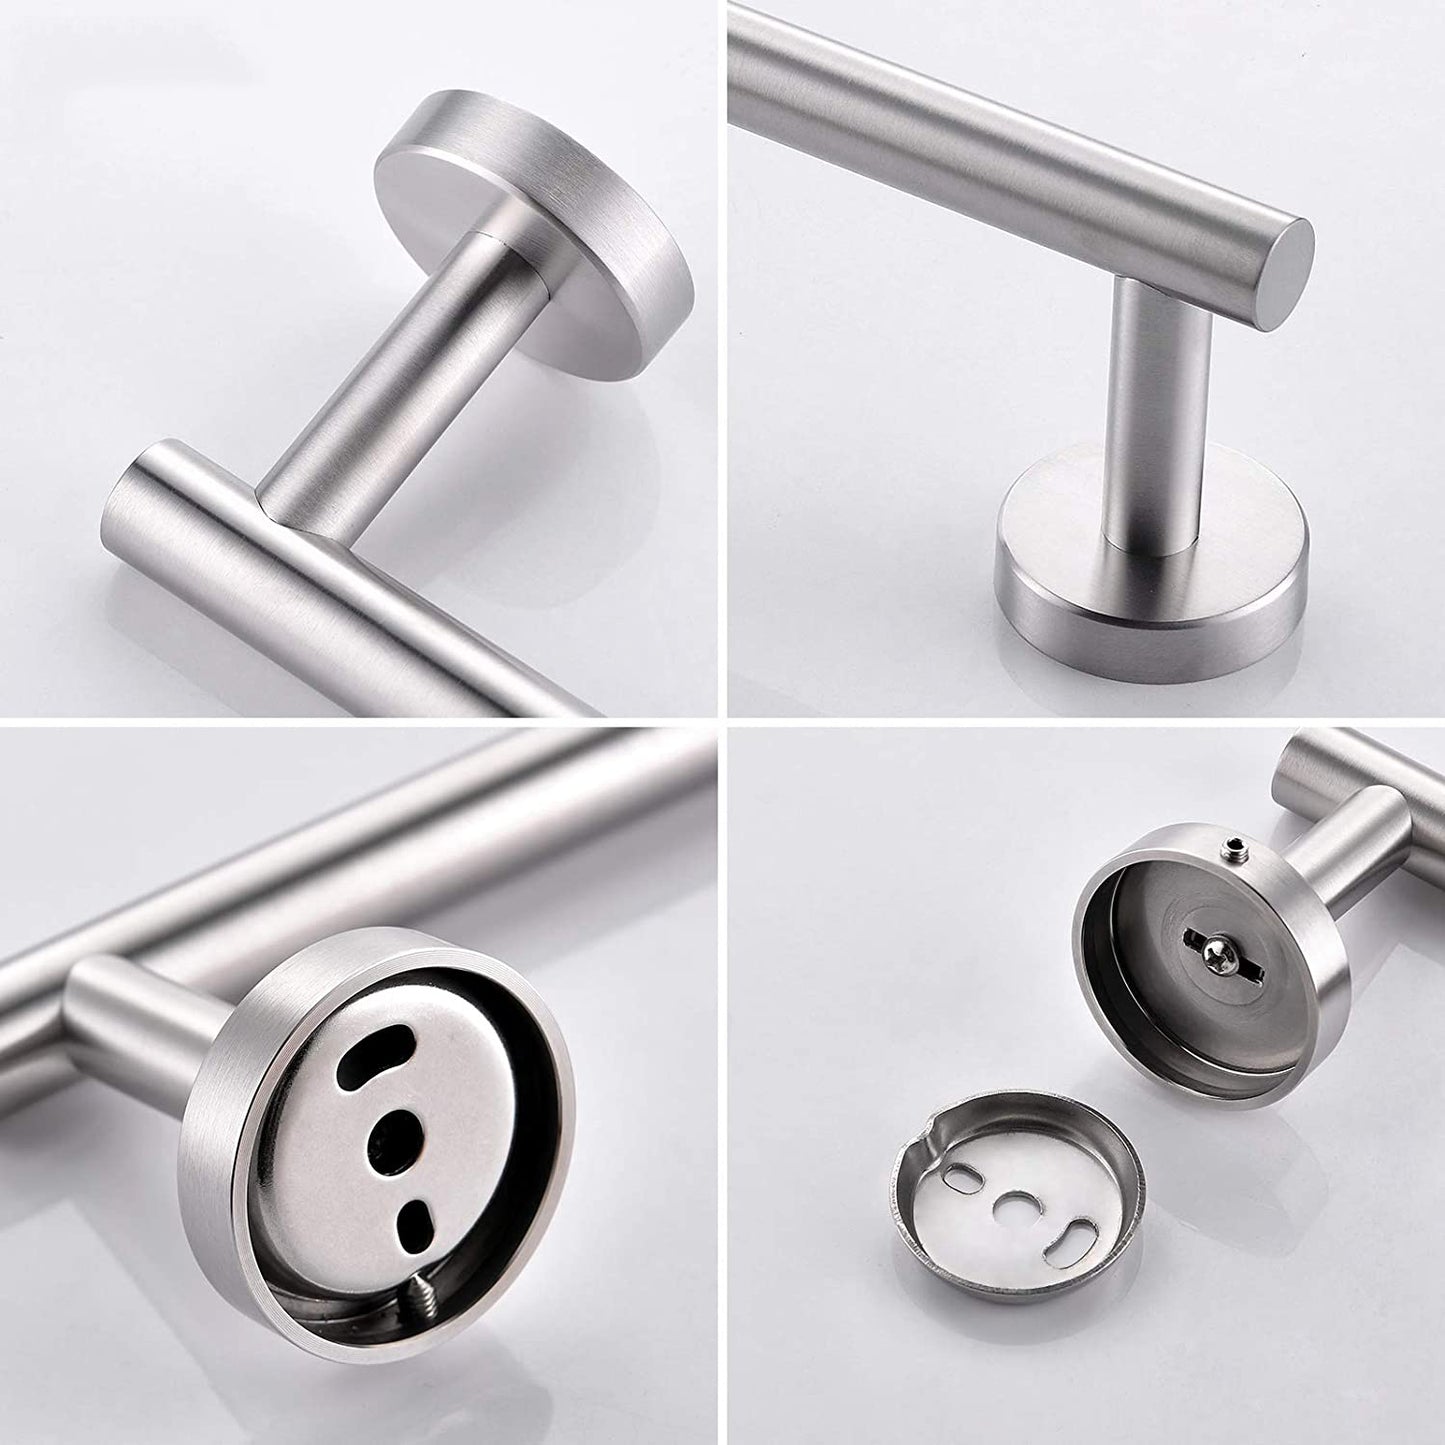 Wall Mounted Towel Rail, 4 Pieces Bathroom Accessories Set, Stainless Steel Toilet Roll Holder and Hooks